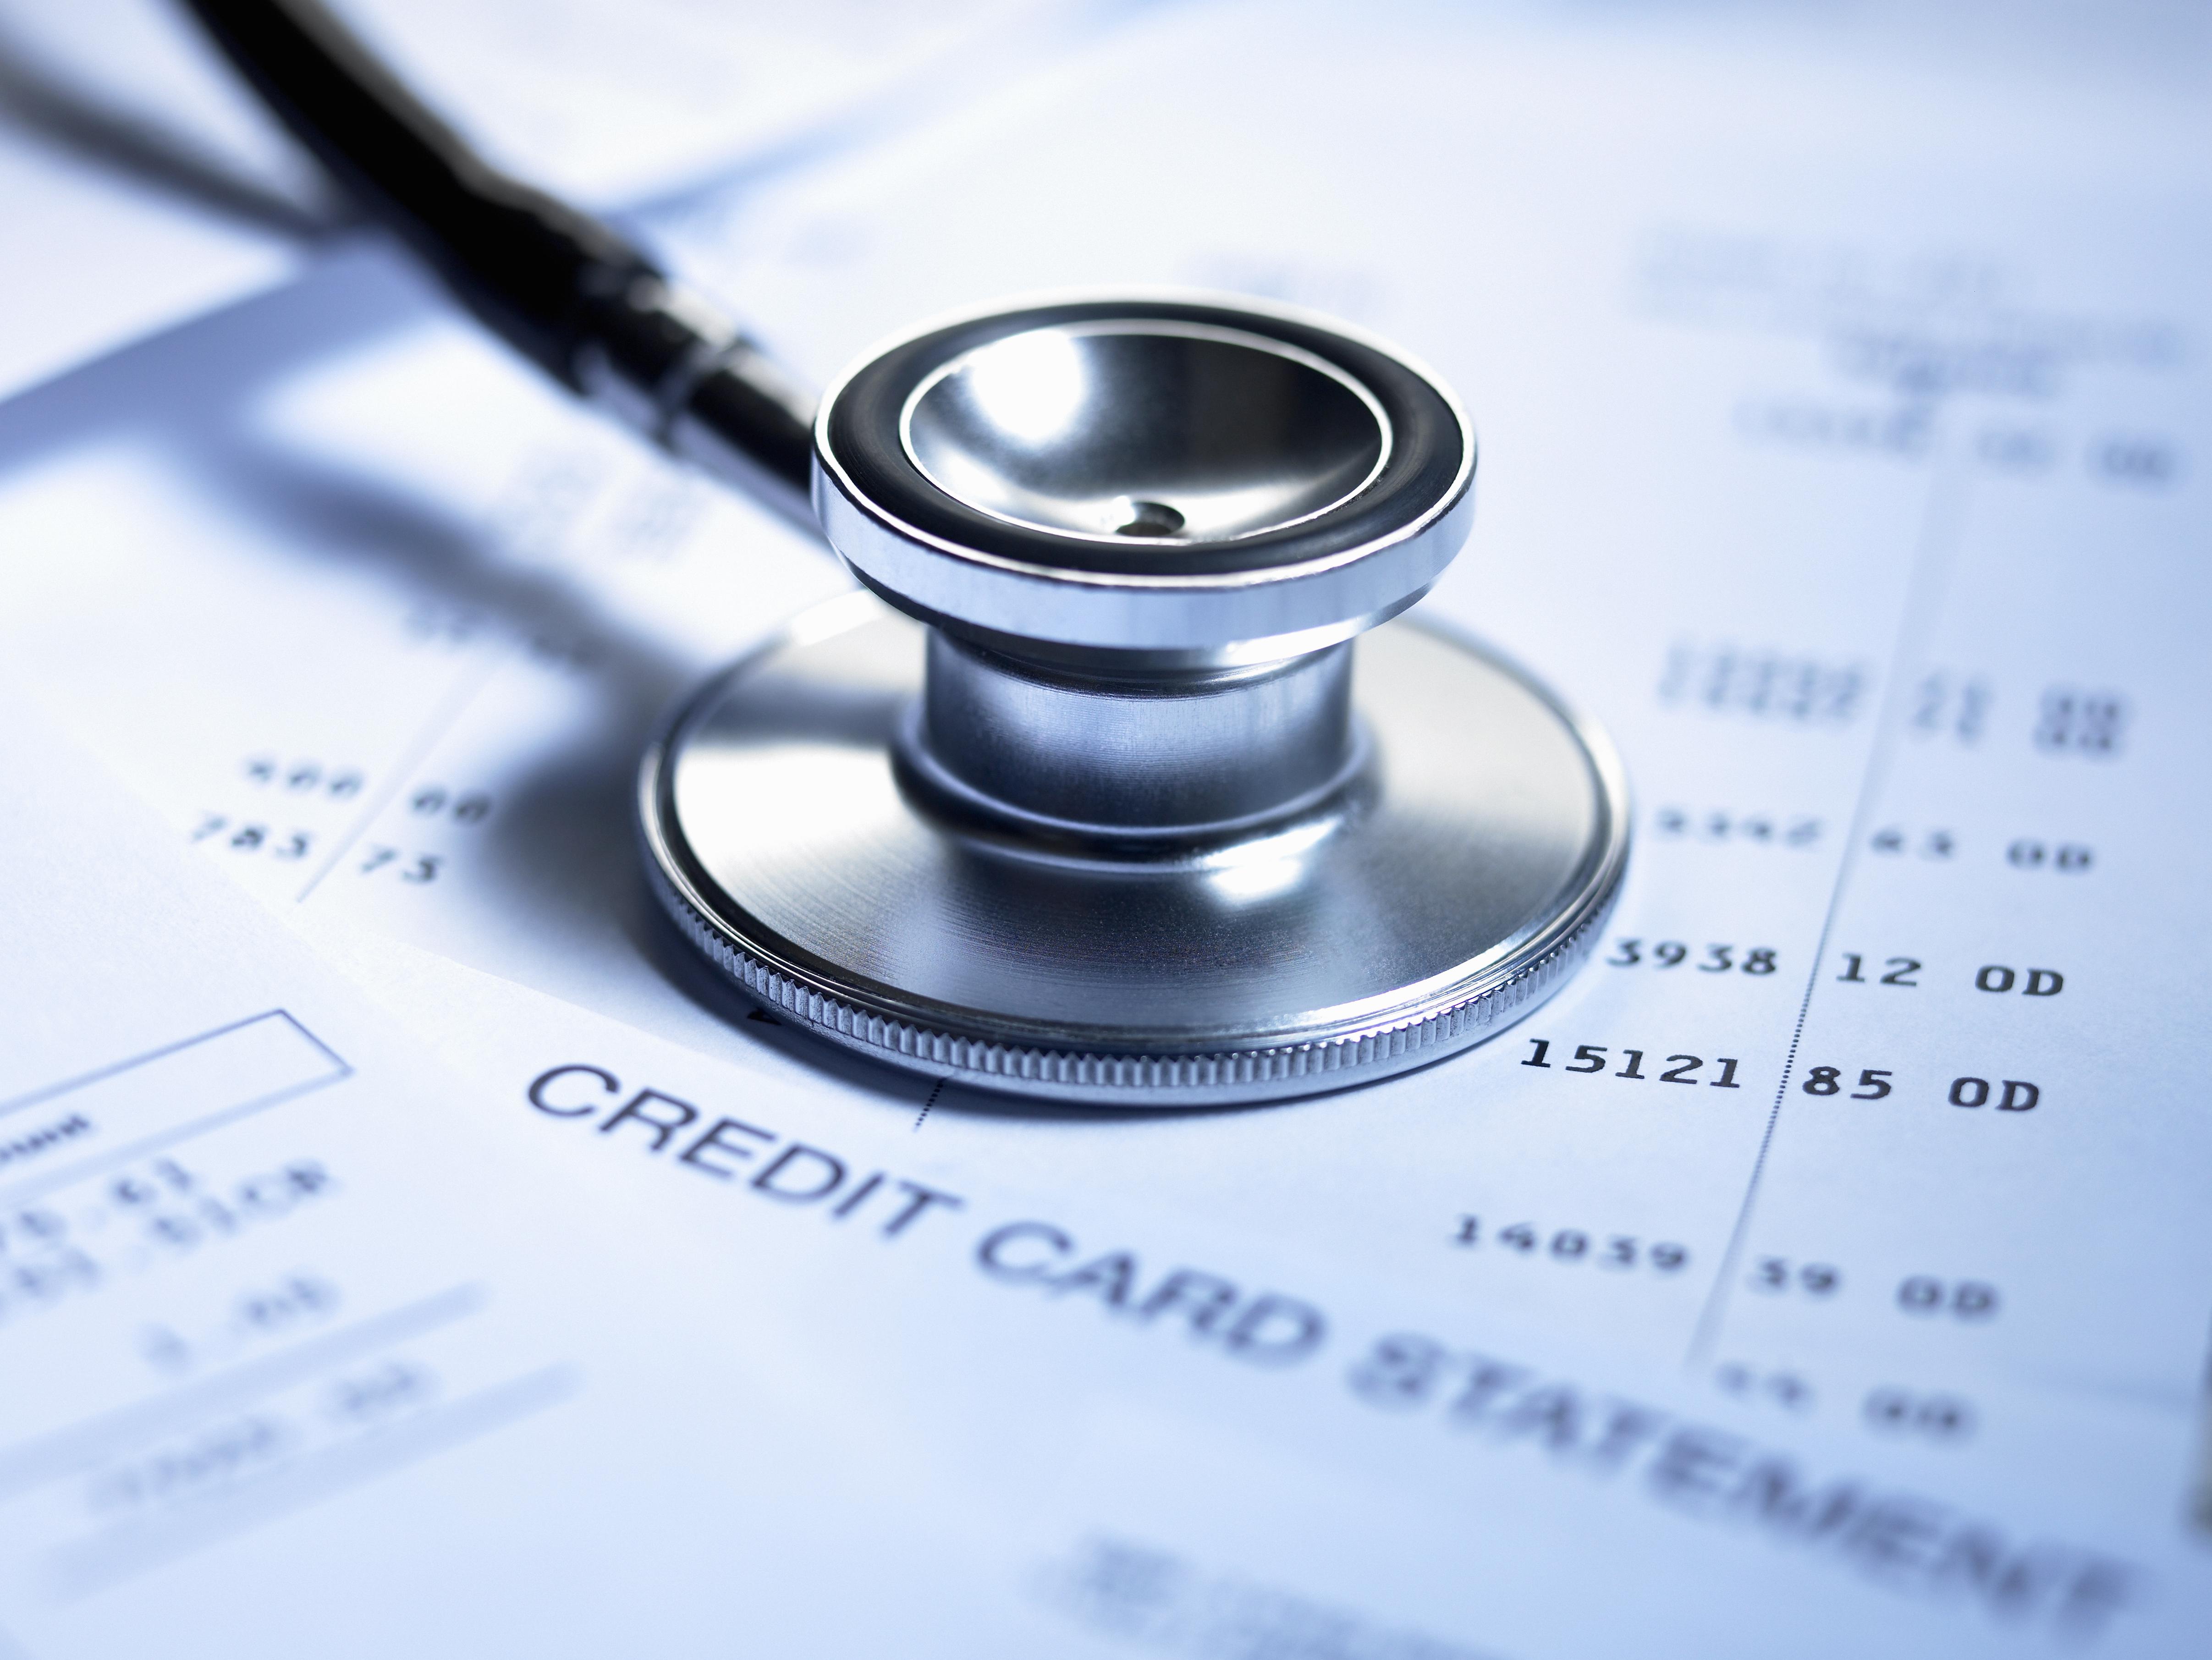 Stethoscope and credit card statement